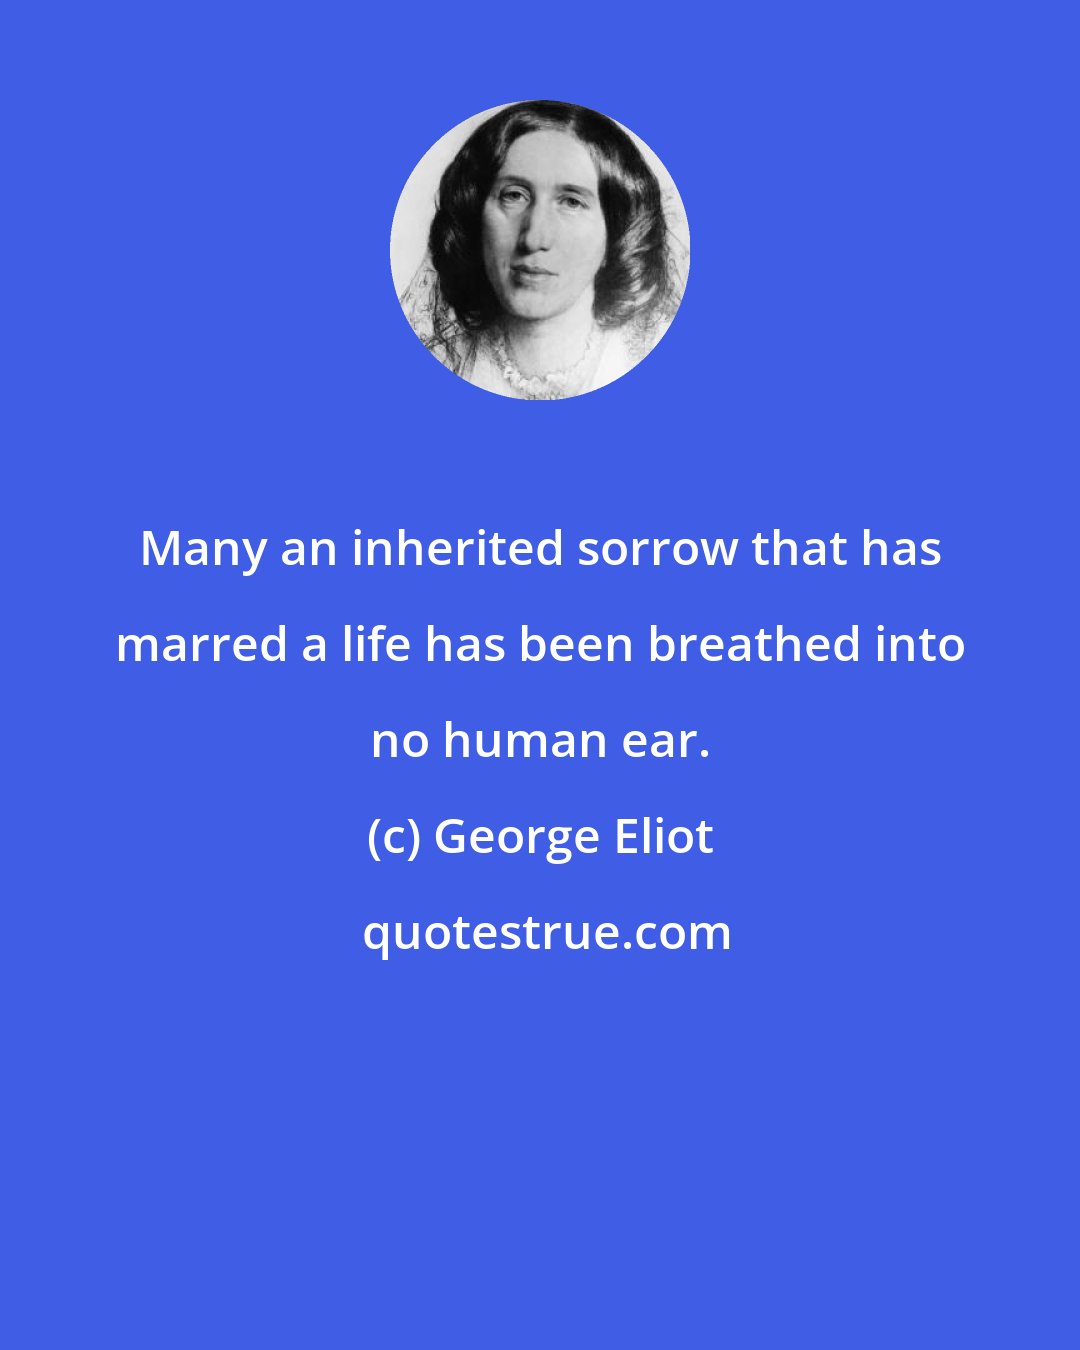 George Eliot: Many an inherited sorrow that has marred a life has been breathed into no human ear.